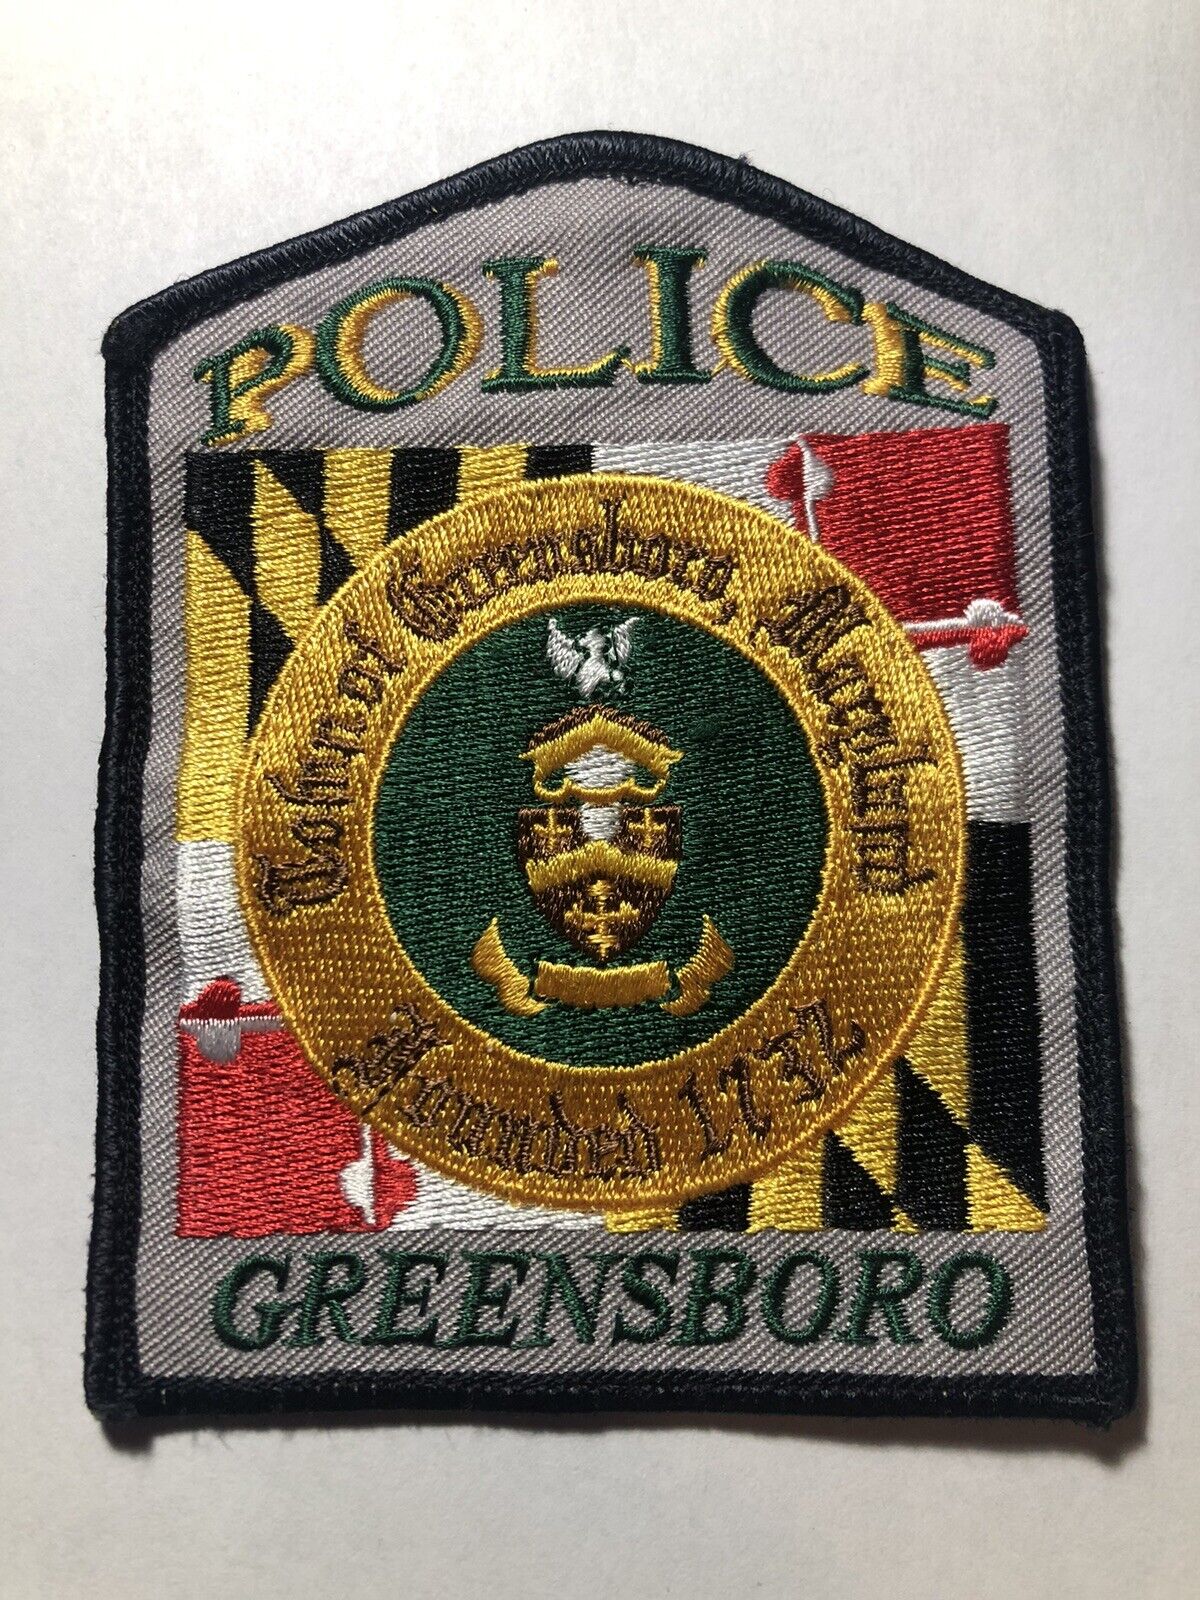 Greensboro Maryland Police Patch